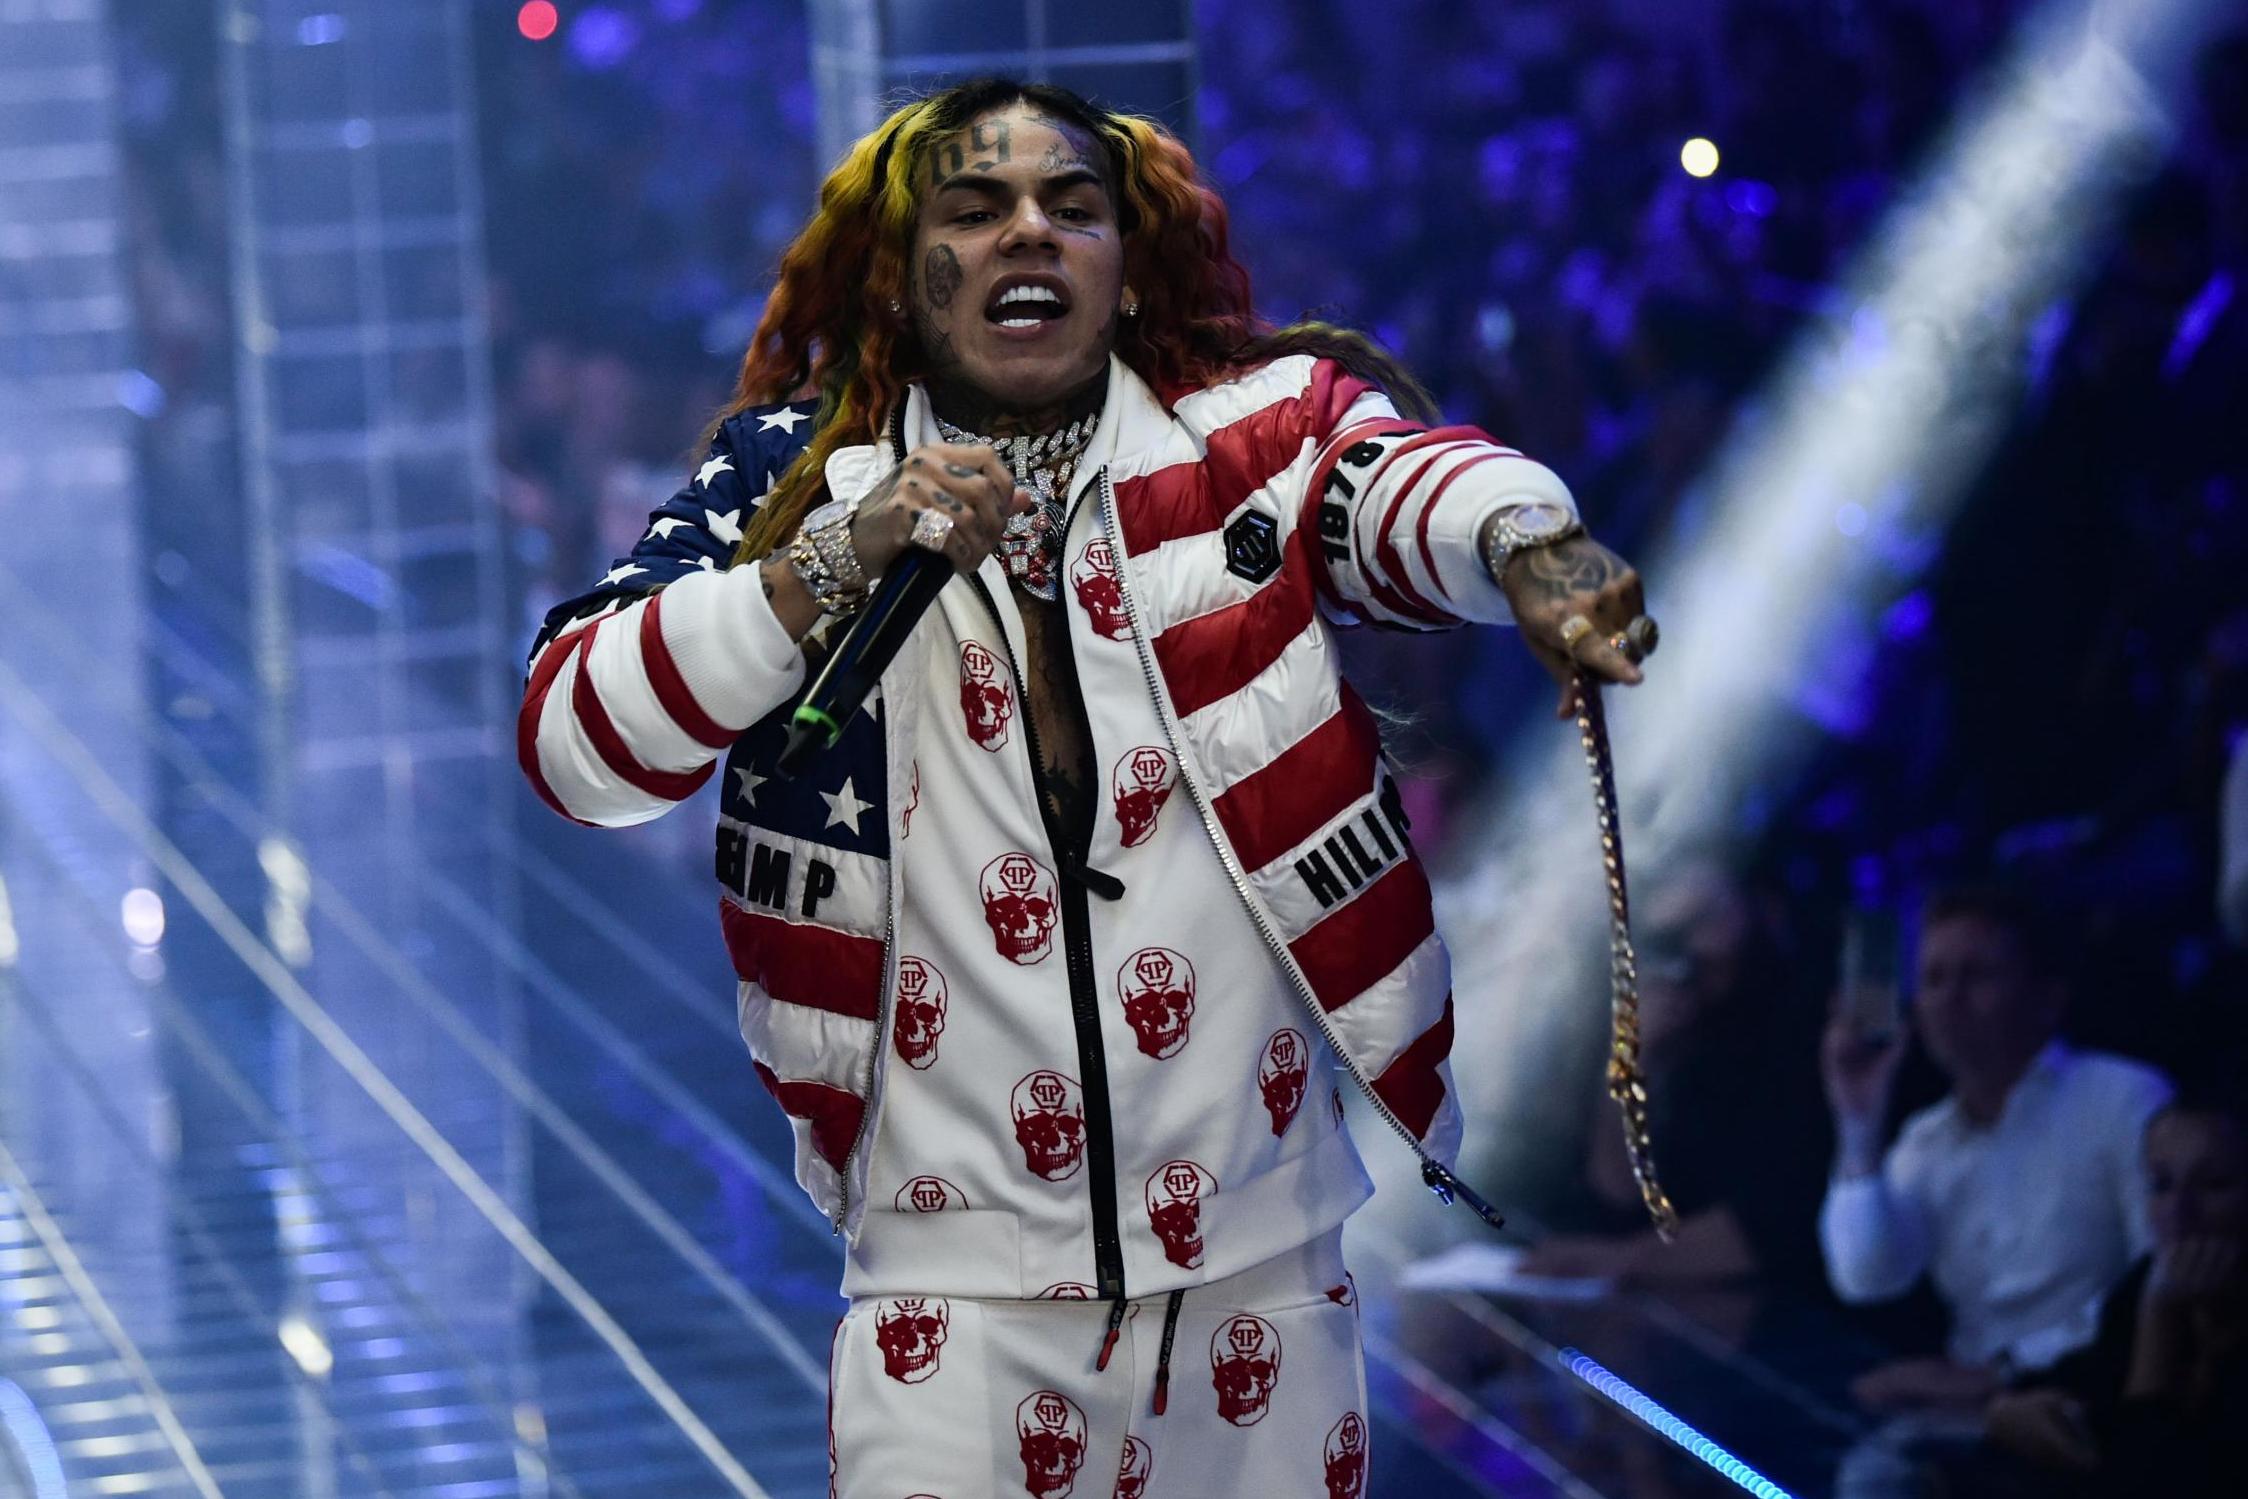 Tekashi 6ix9ine could be released from prison early due to coronavirus pandemic